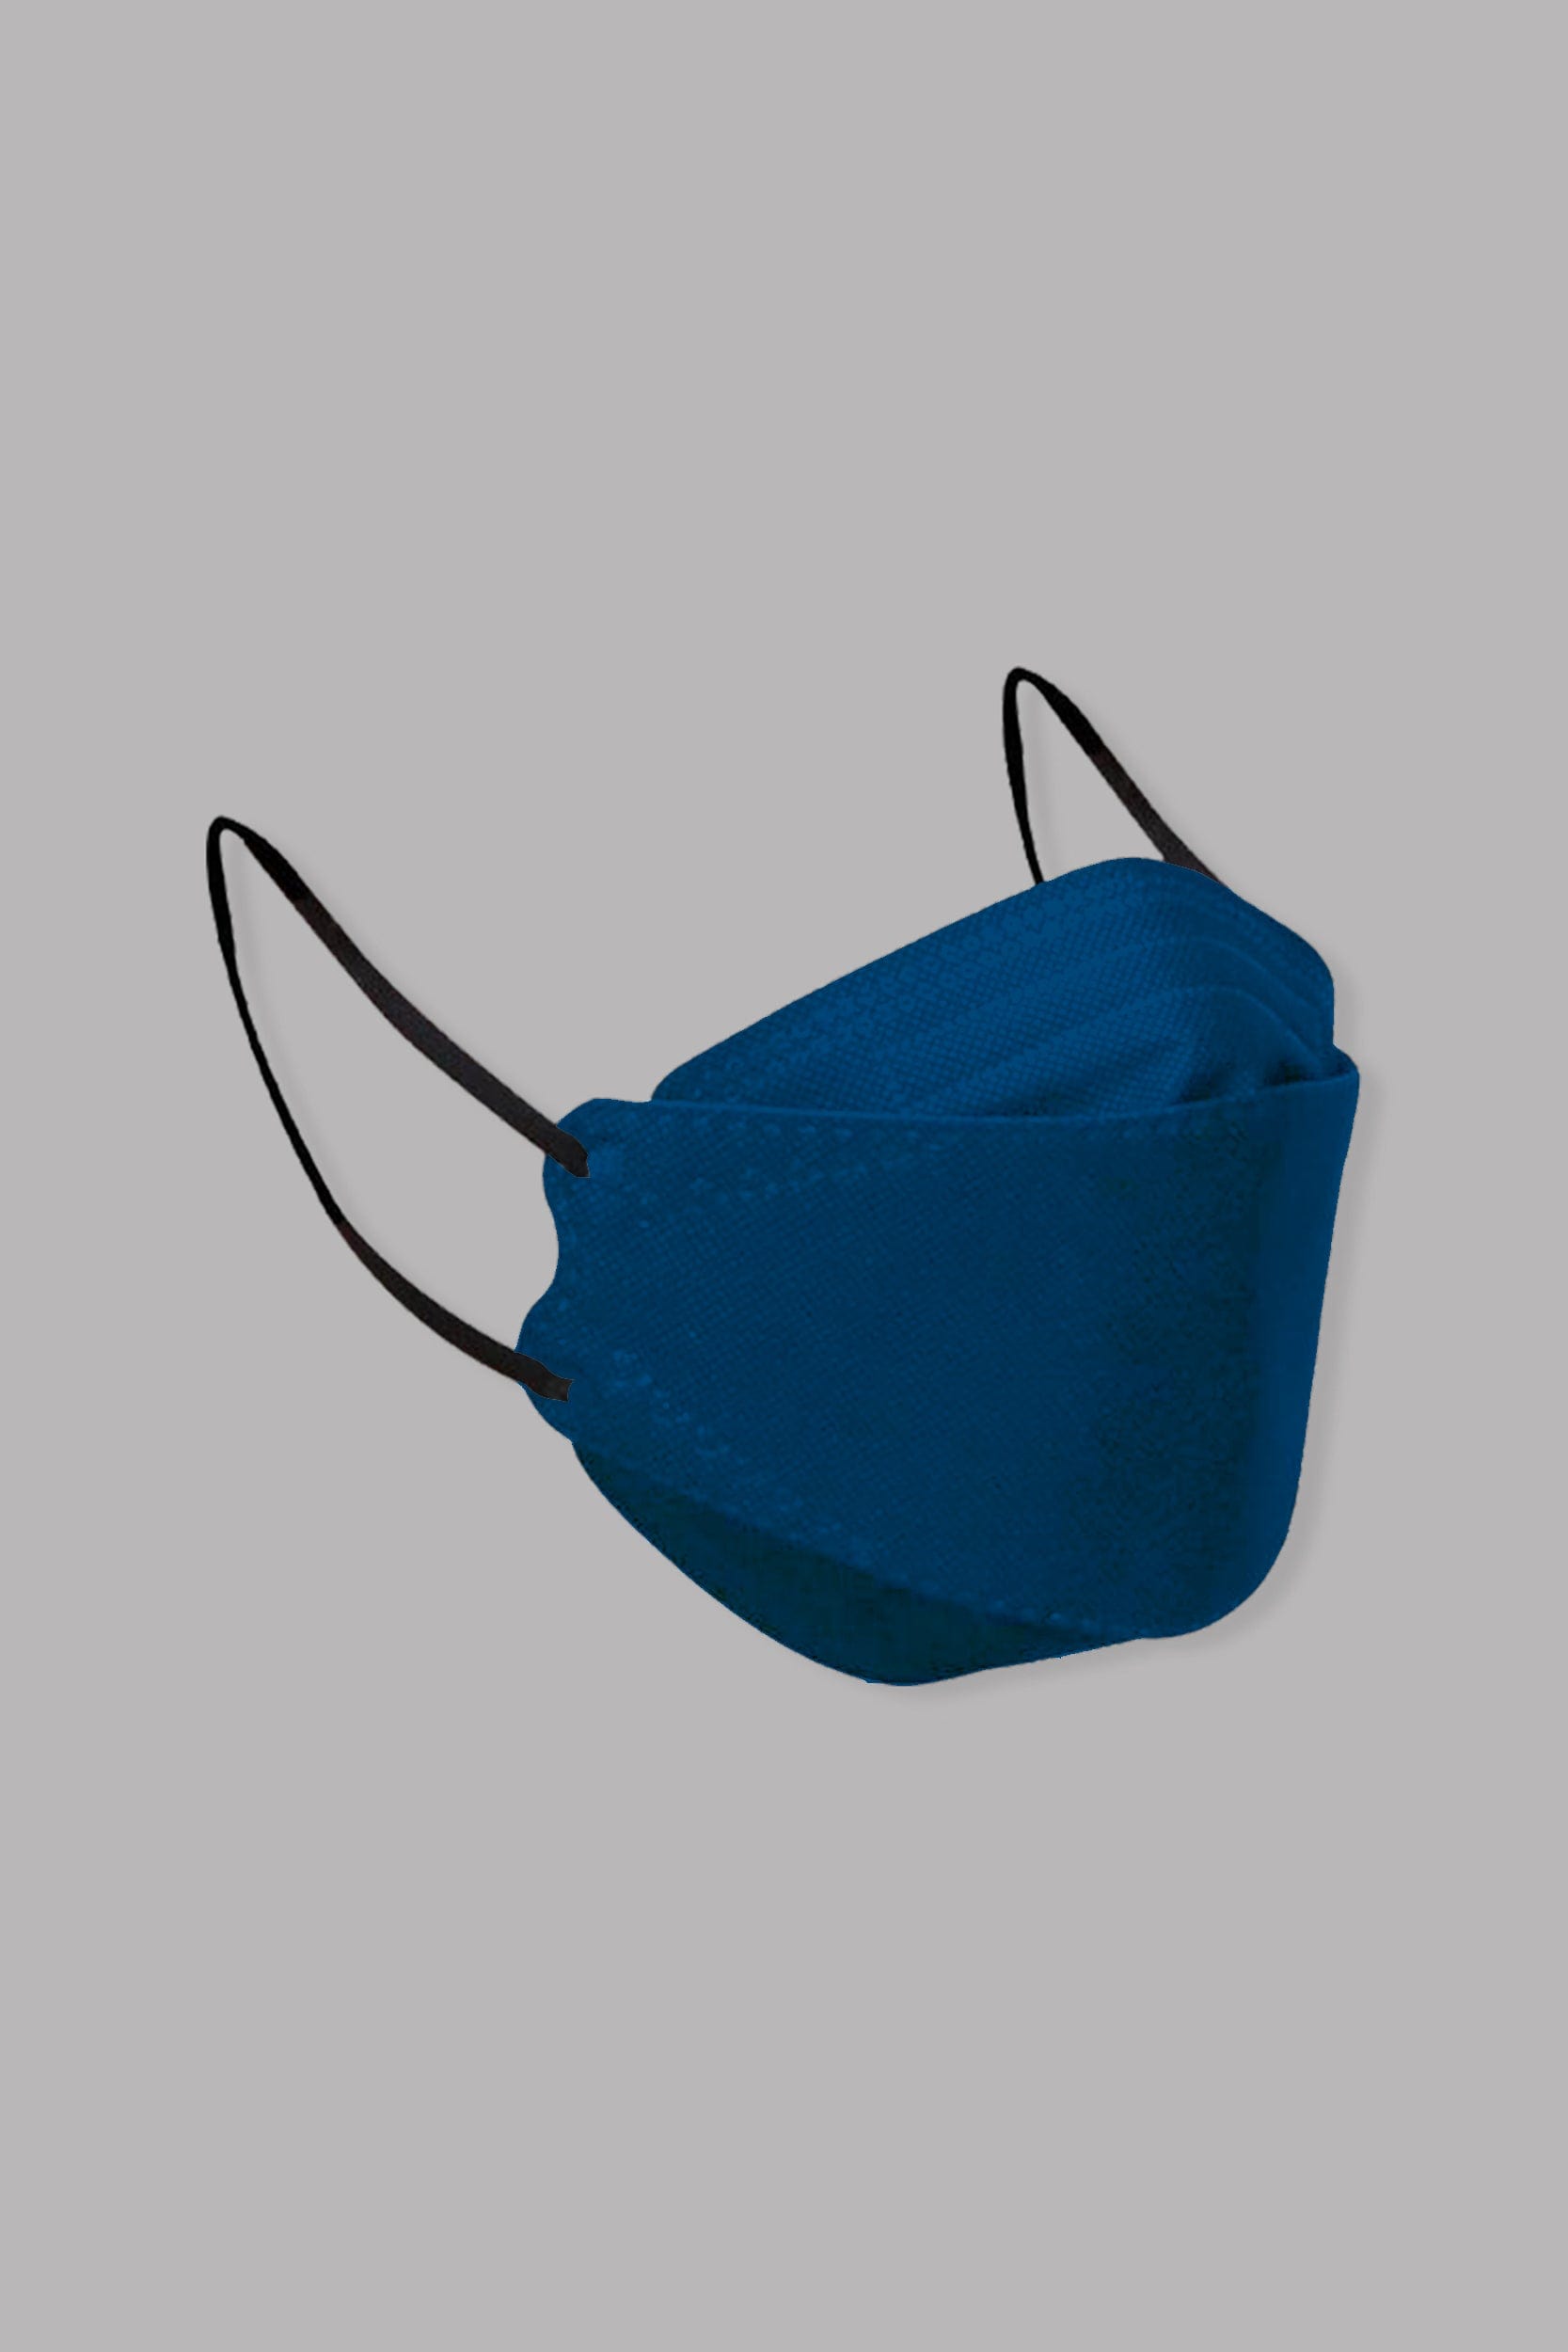 Stylish navy blue KF94 face mask, with soft black ear loops and high quality fabric. 